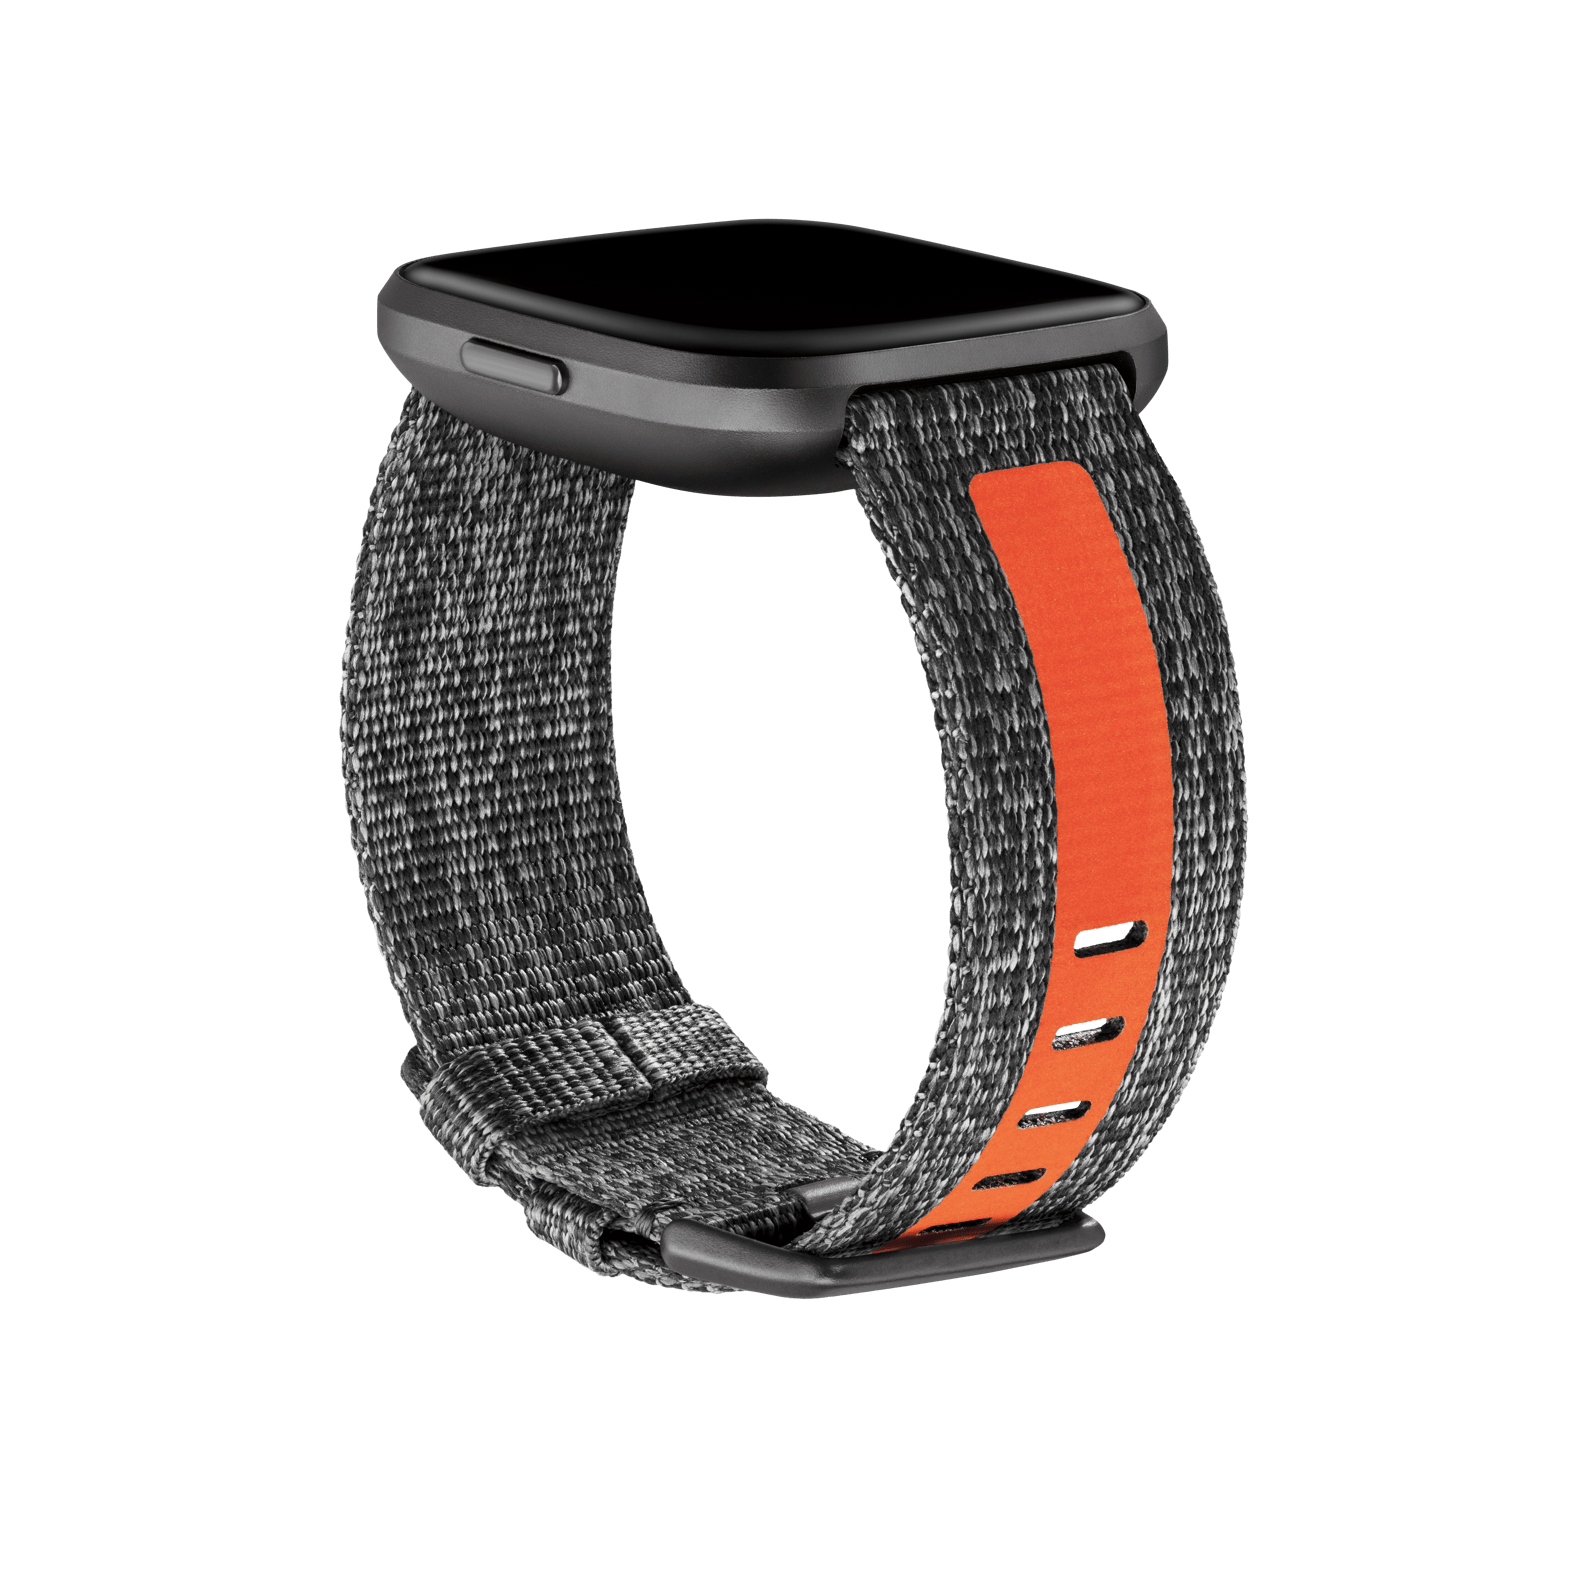 Fitbit Versa 2™ Family Woven Reflective Band (Charcoal/Orange) - Large